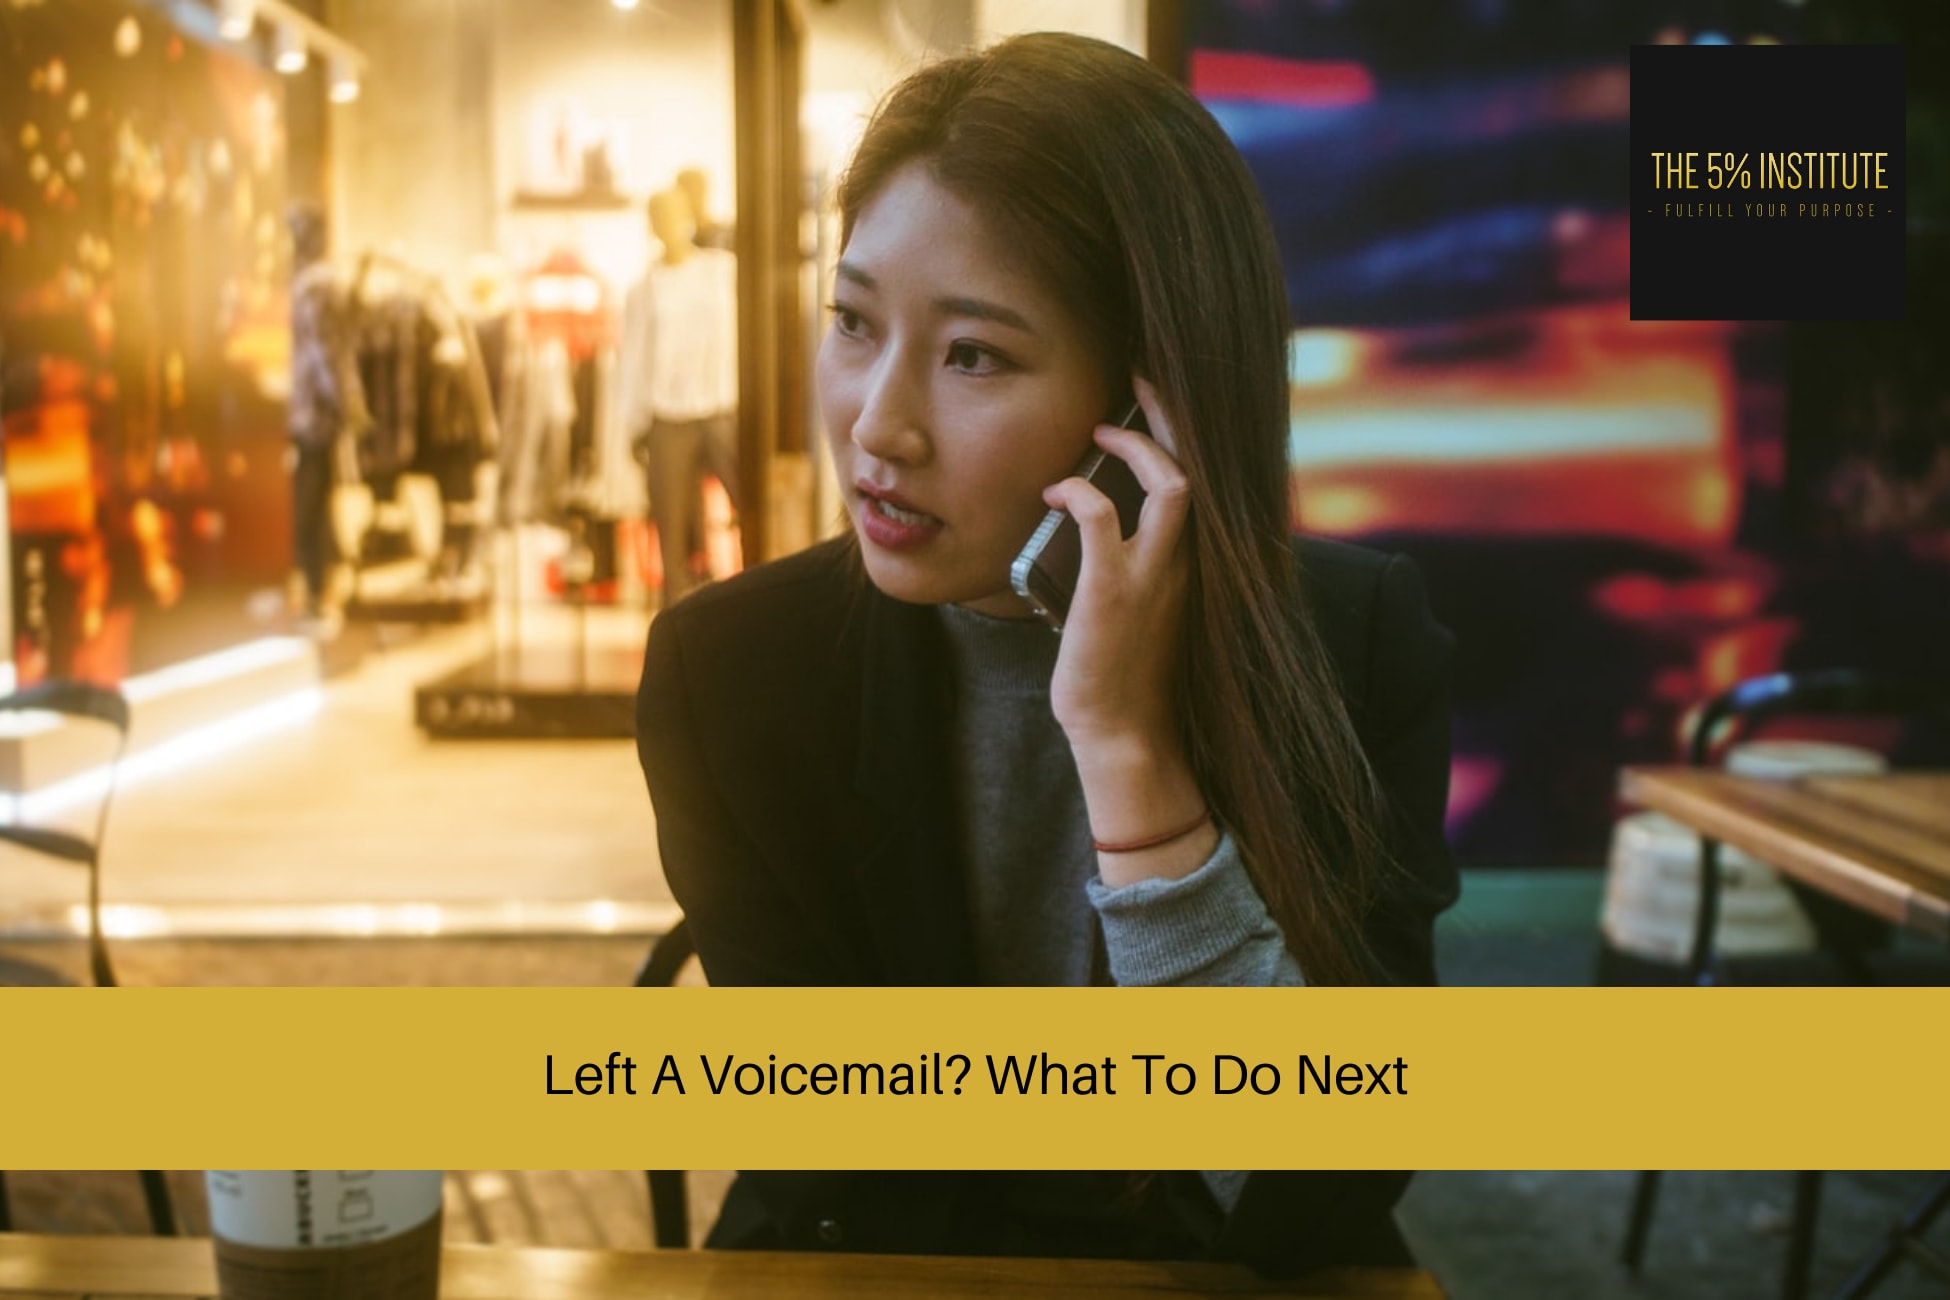 Left A Voicemail? What To Do Next